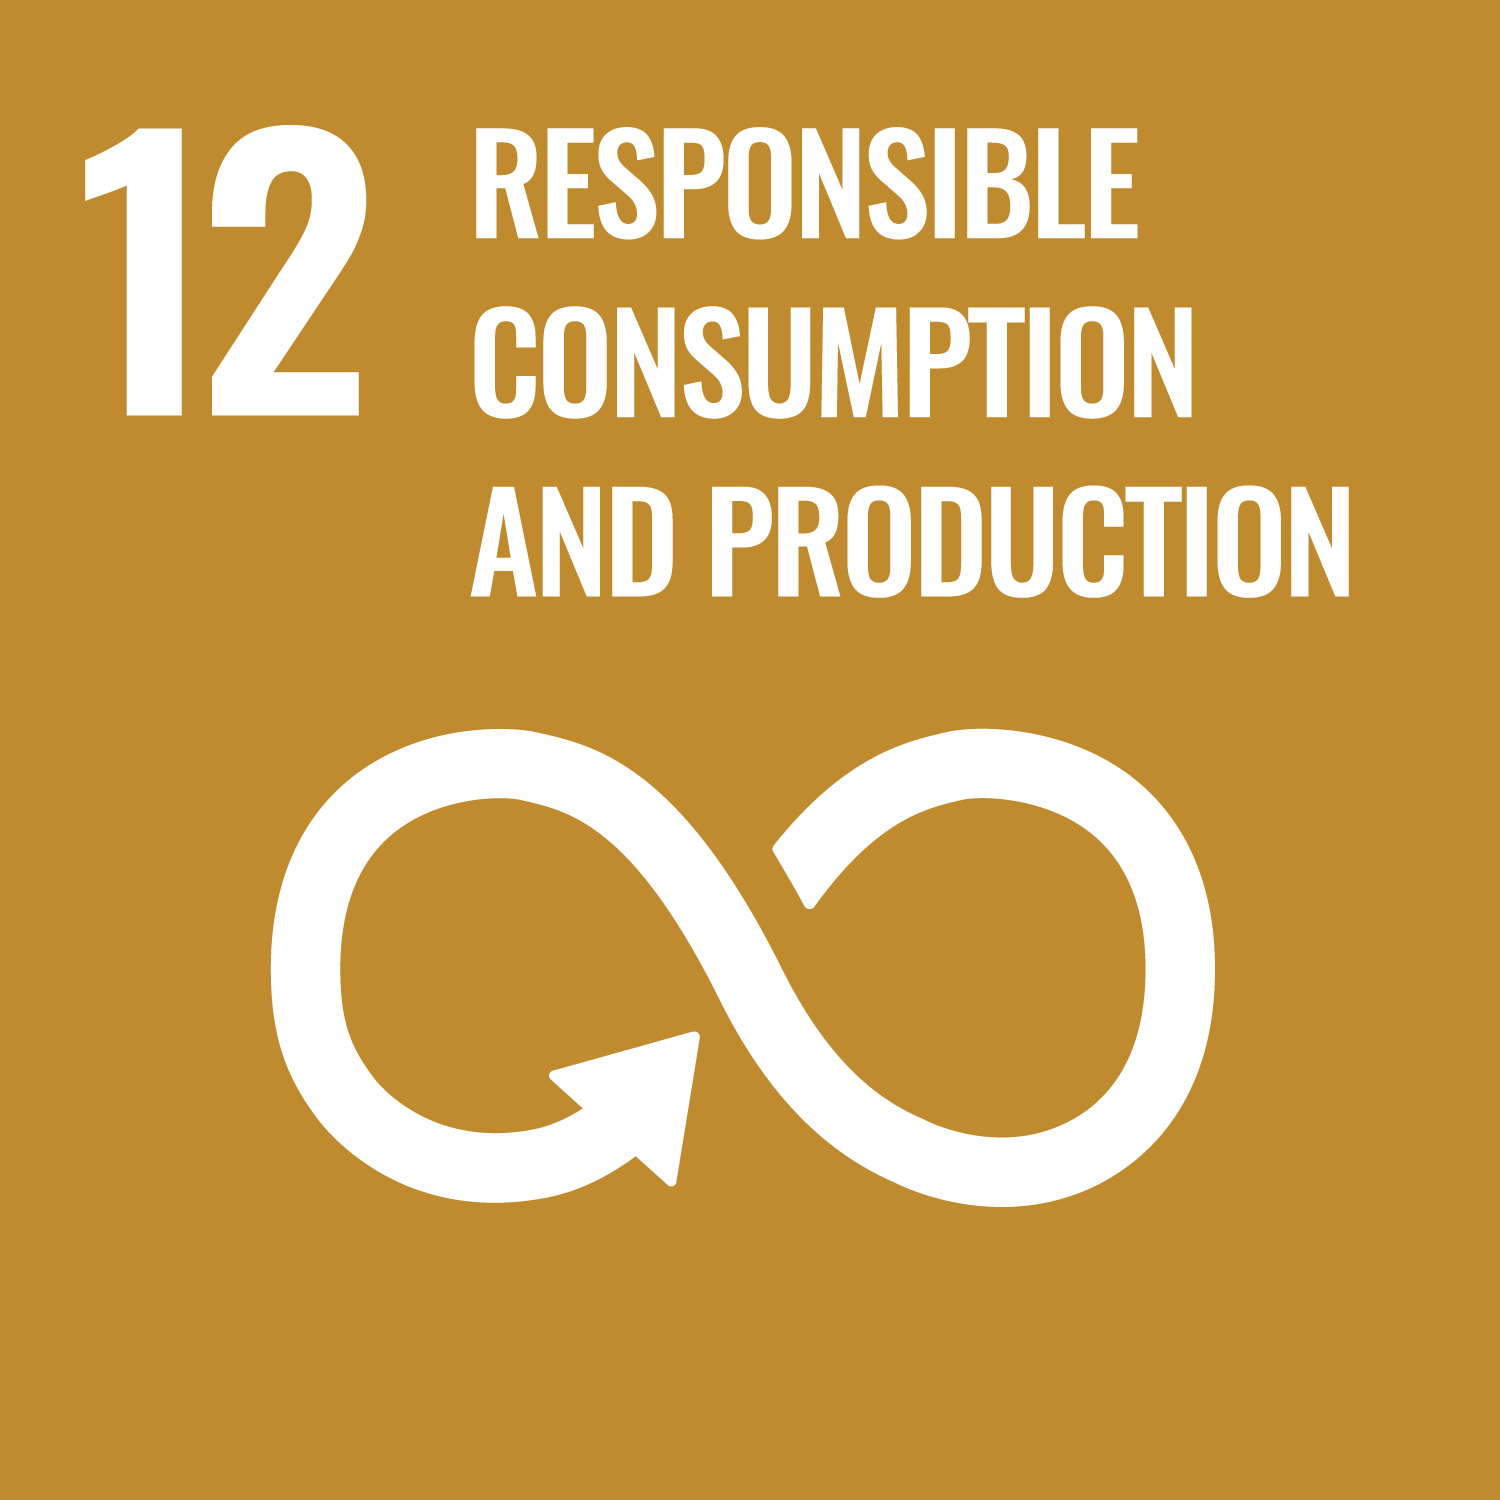 SDGs Goal 12 Responsible Consumption and Production cover image